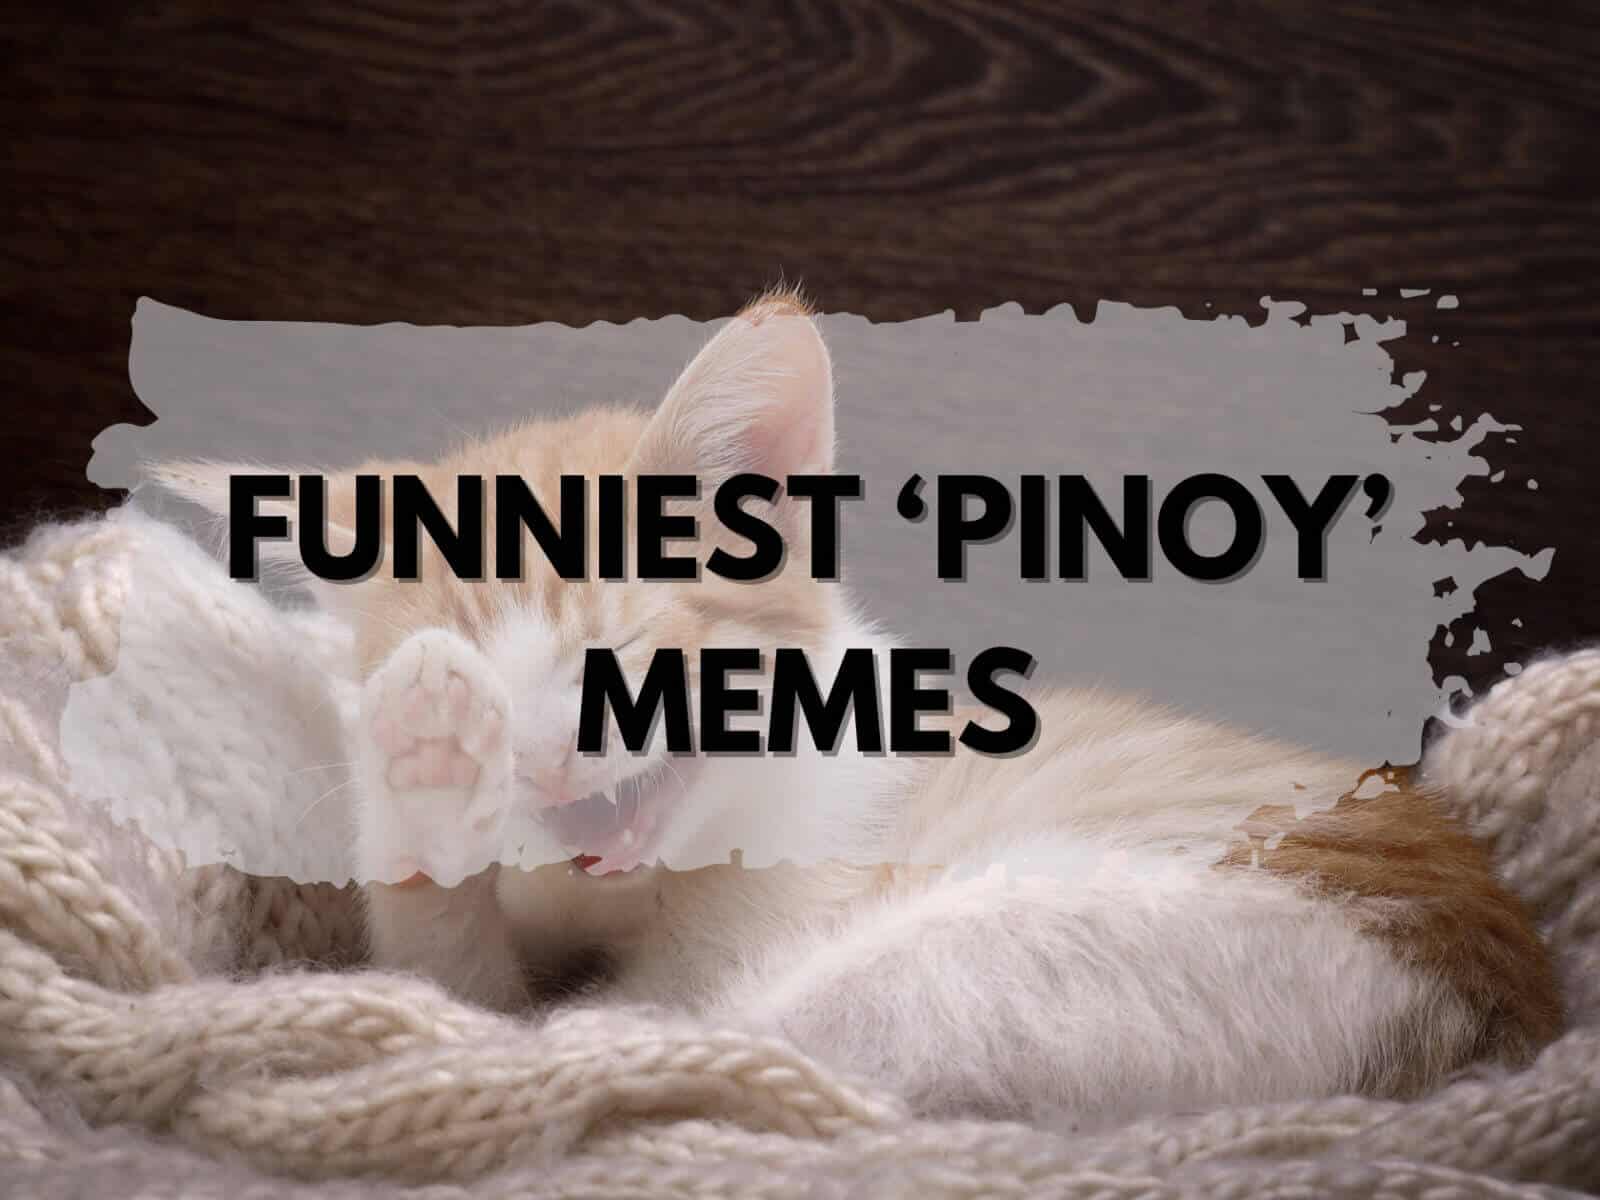 The funniest Pinoy memes.